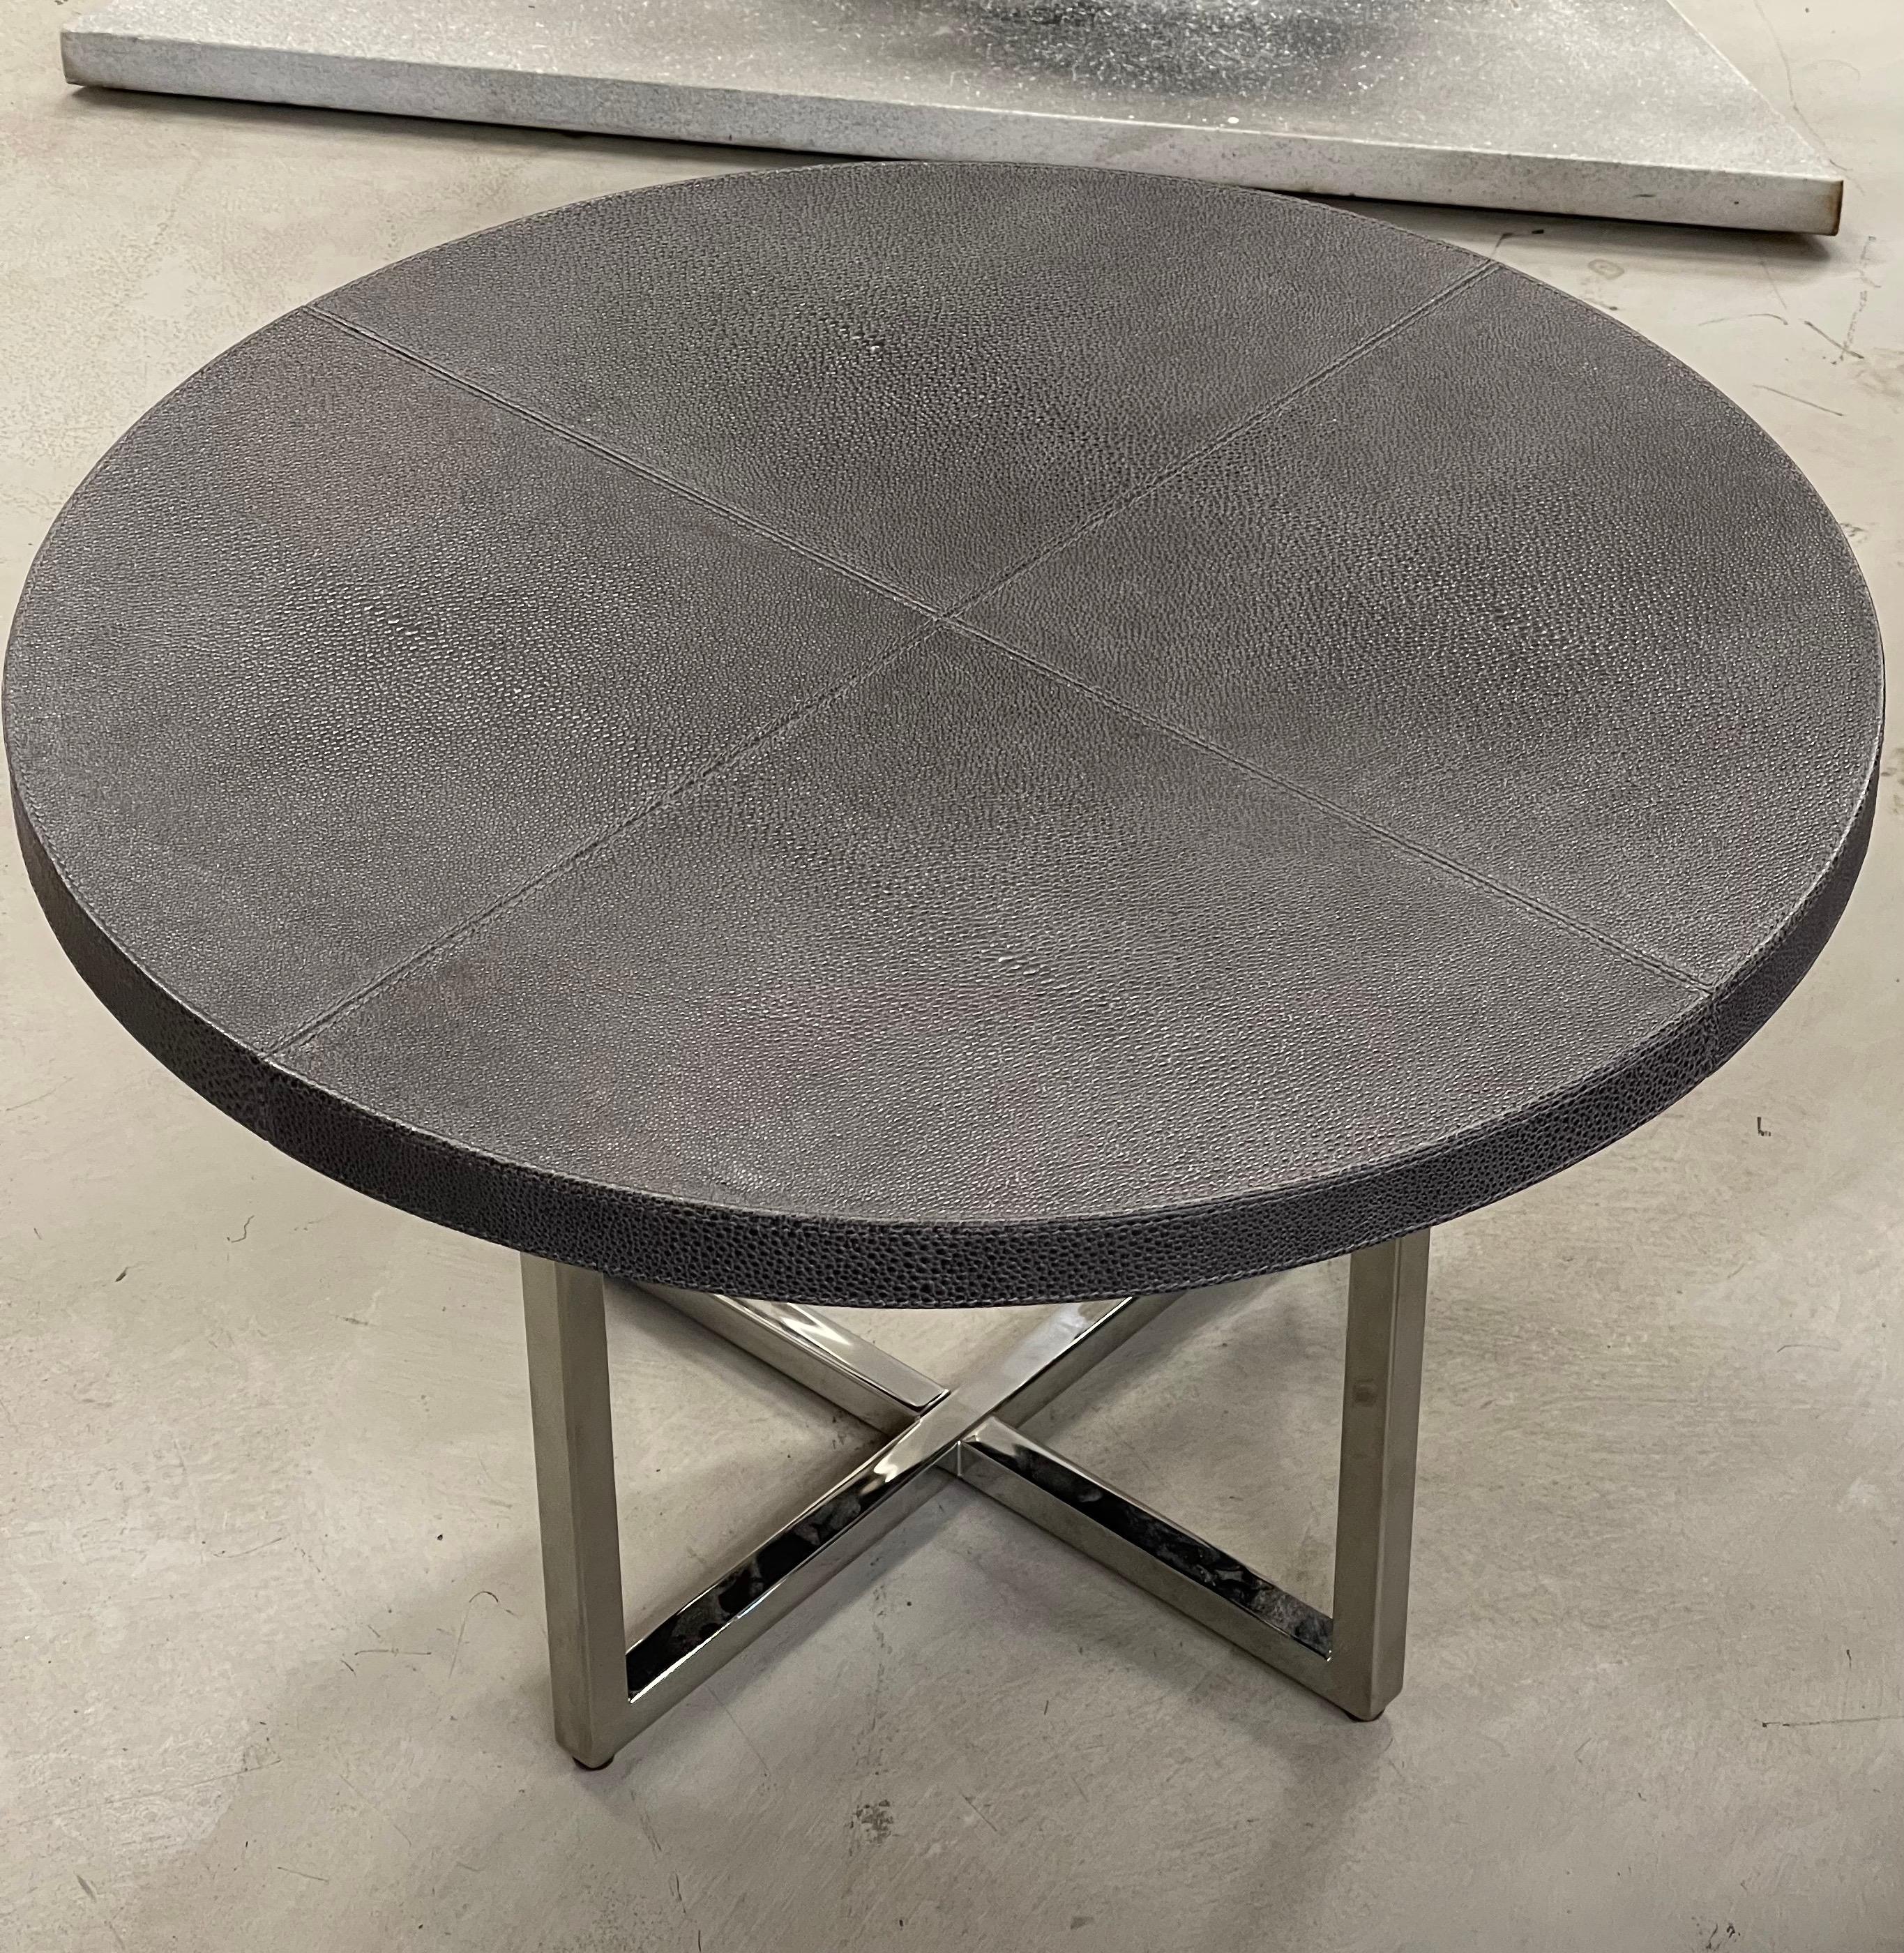 Beautiful faux shagreen top Fendi Casa cocktail coffee table or side table. Nice size at 23.75 inches in diameter and 15 inches high.  Very good condition with some minor blemishes to base.  Pictured next to a Charles and Ray Eames 670/671 Rosewood